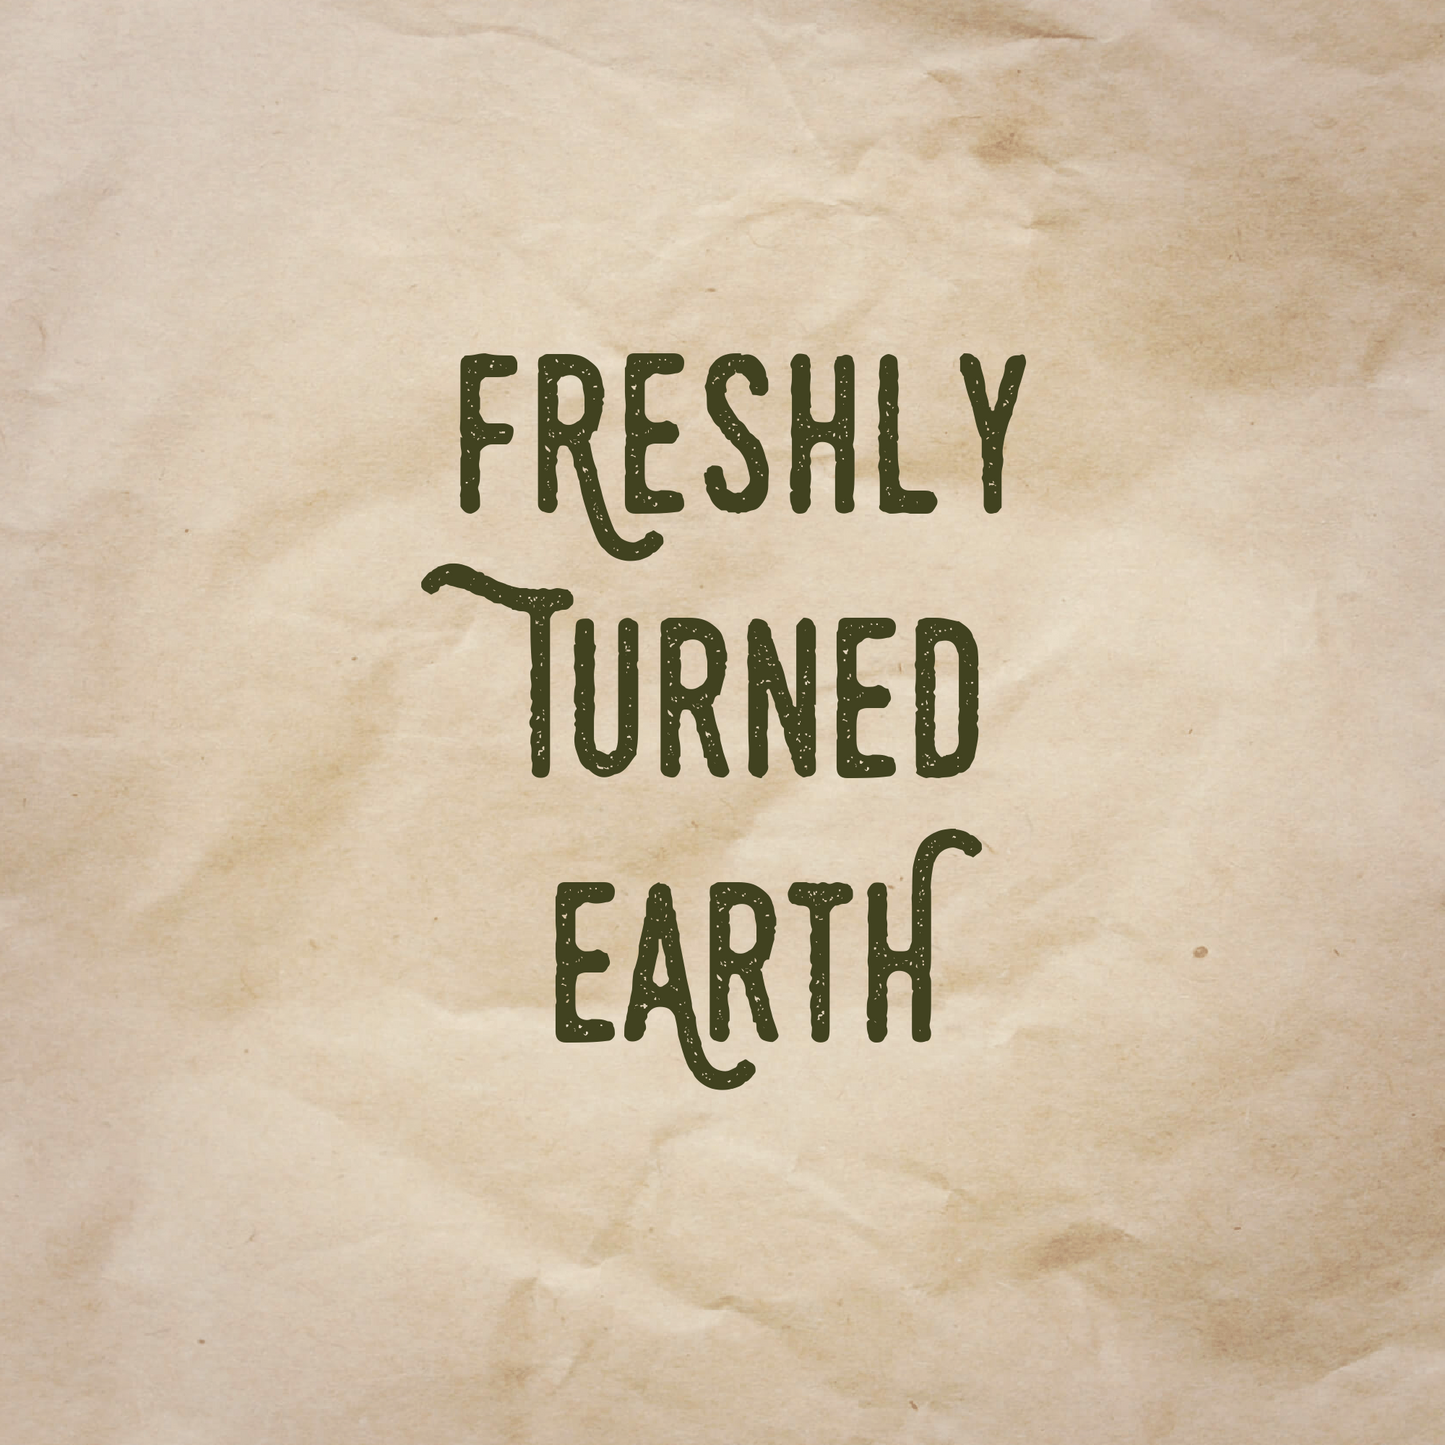 Freshly Turned Earth scent notes: Freshly turned earth.